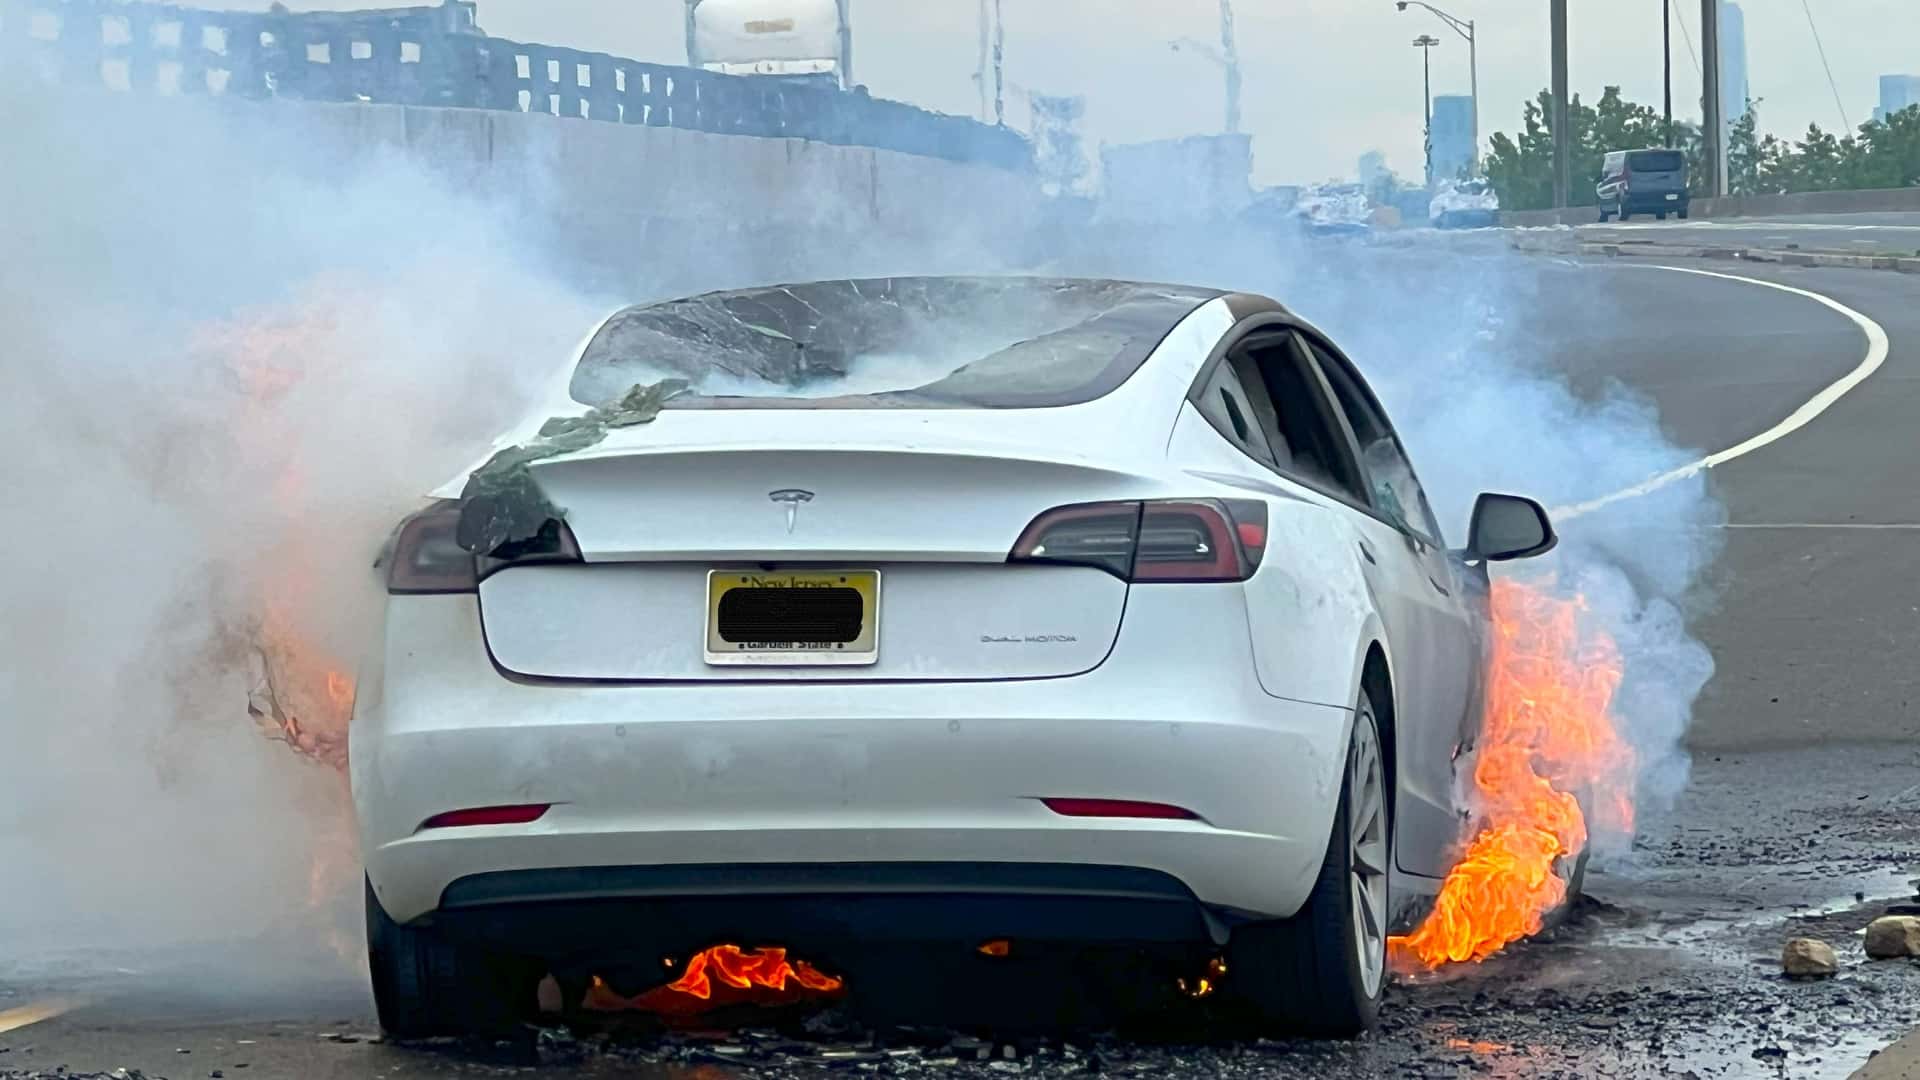 Tesla Catches Fire: The Latest Updates and Controversies